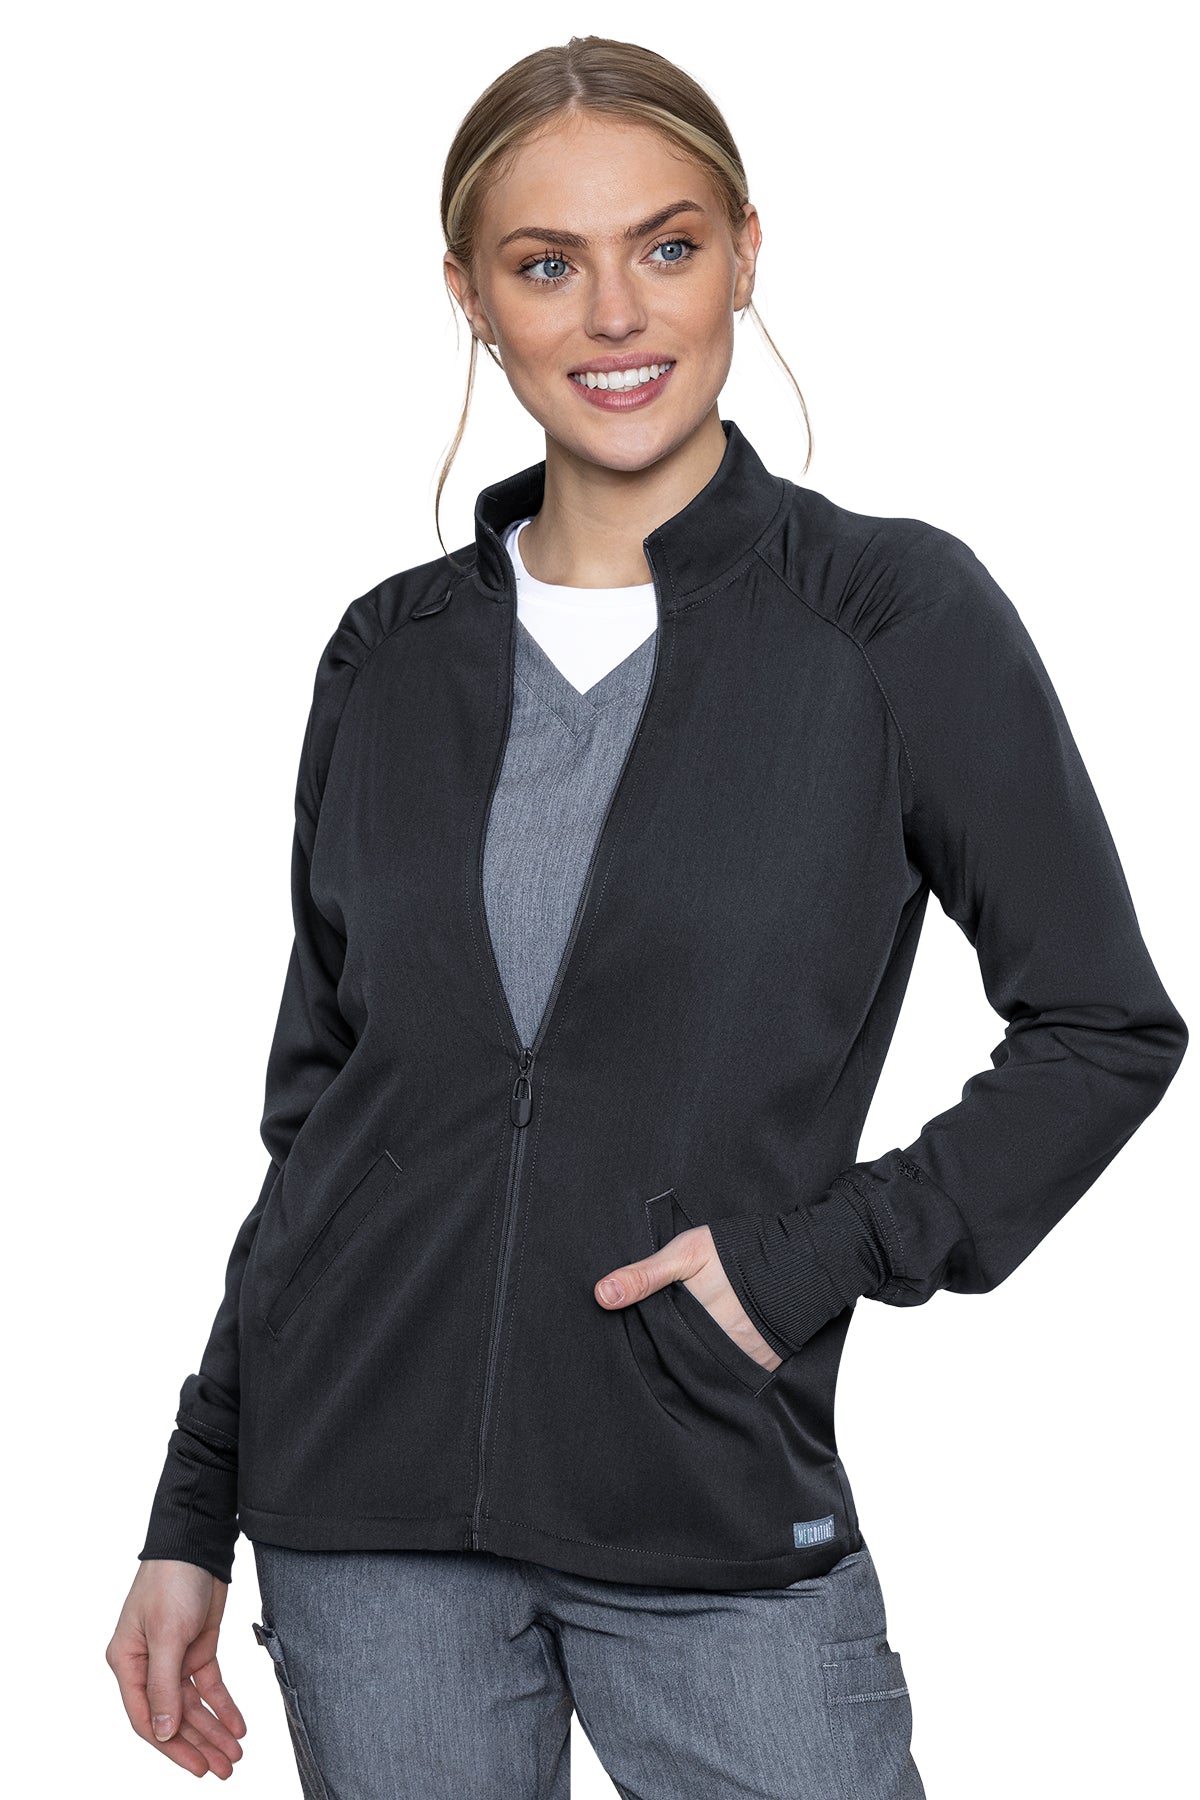 Med Couture Scrub Jacket Touch Raglan Warmup in Pewter at Parker's Clothing and Shoes.